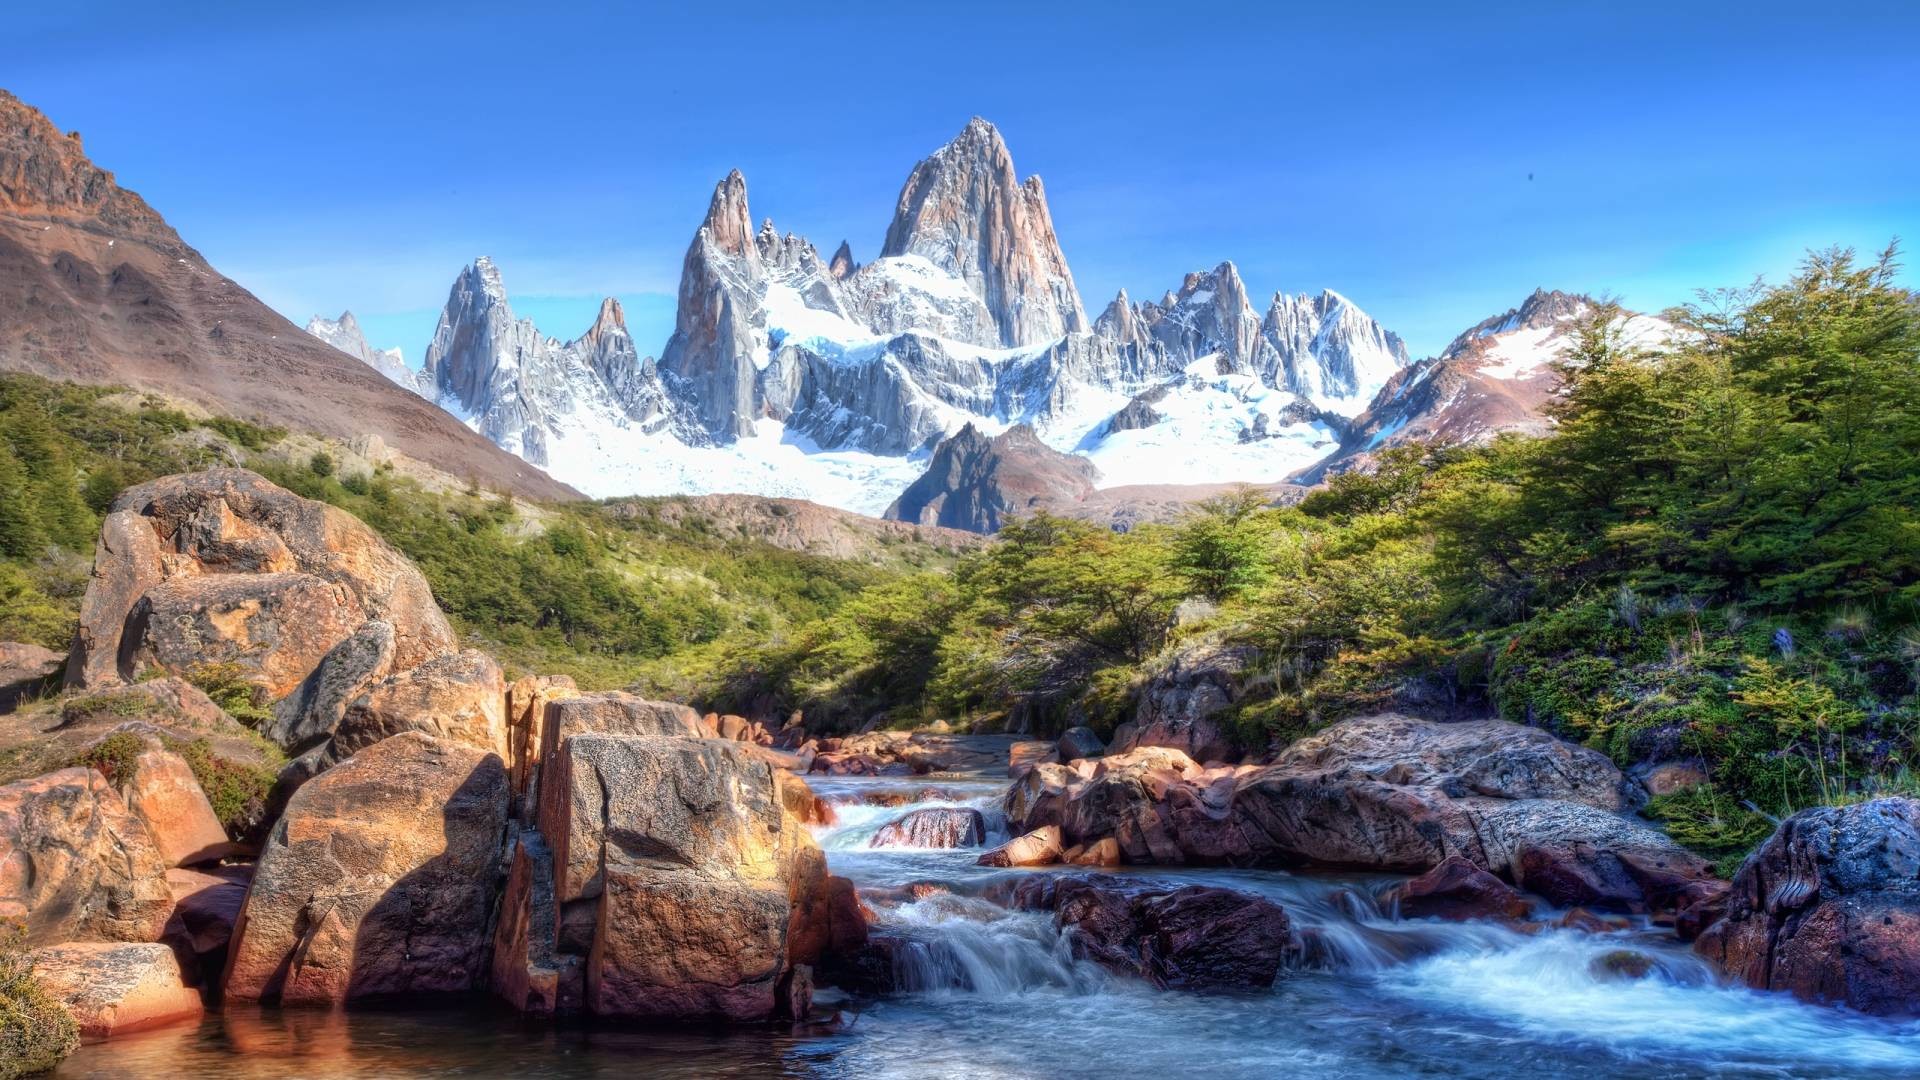 1920x1080 Mountains and River wallpaper background hd 1080P,Picturesque .